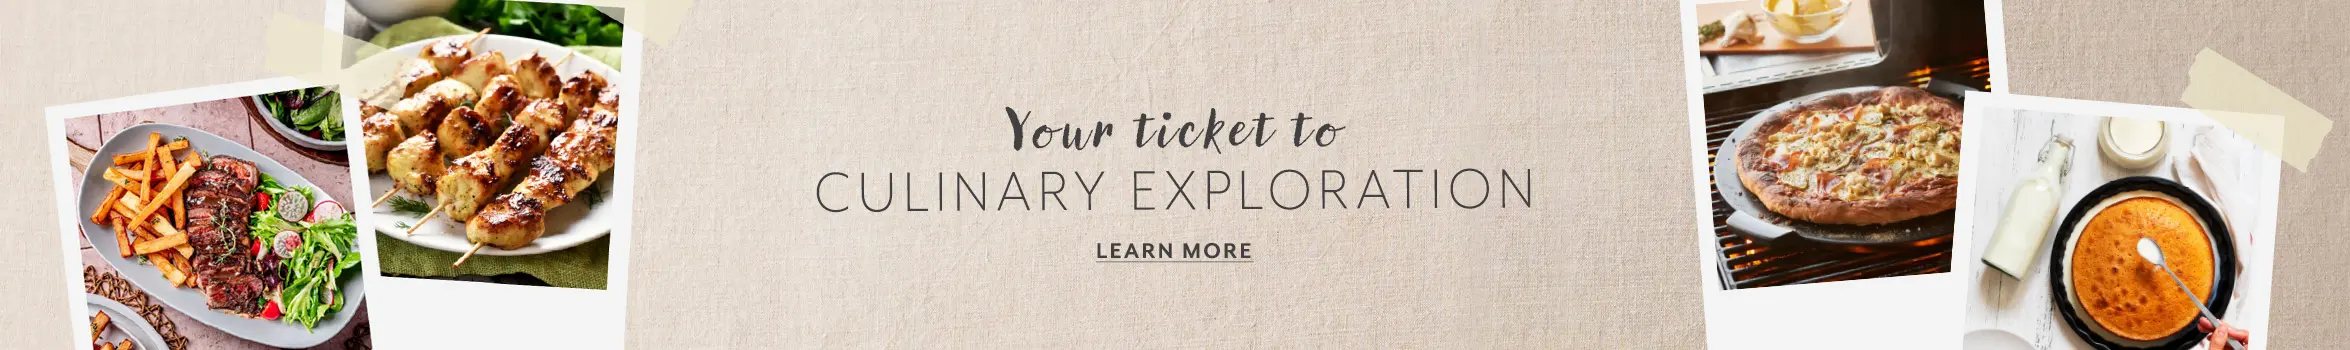 Your ticket to culinary exploration, learn more.